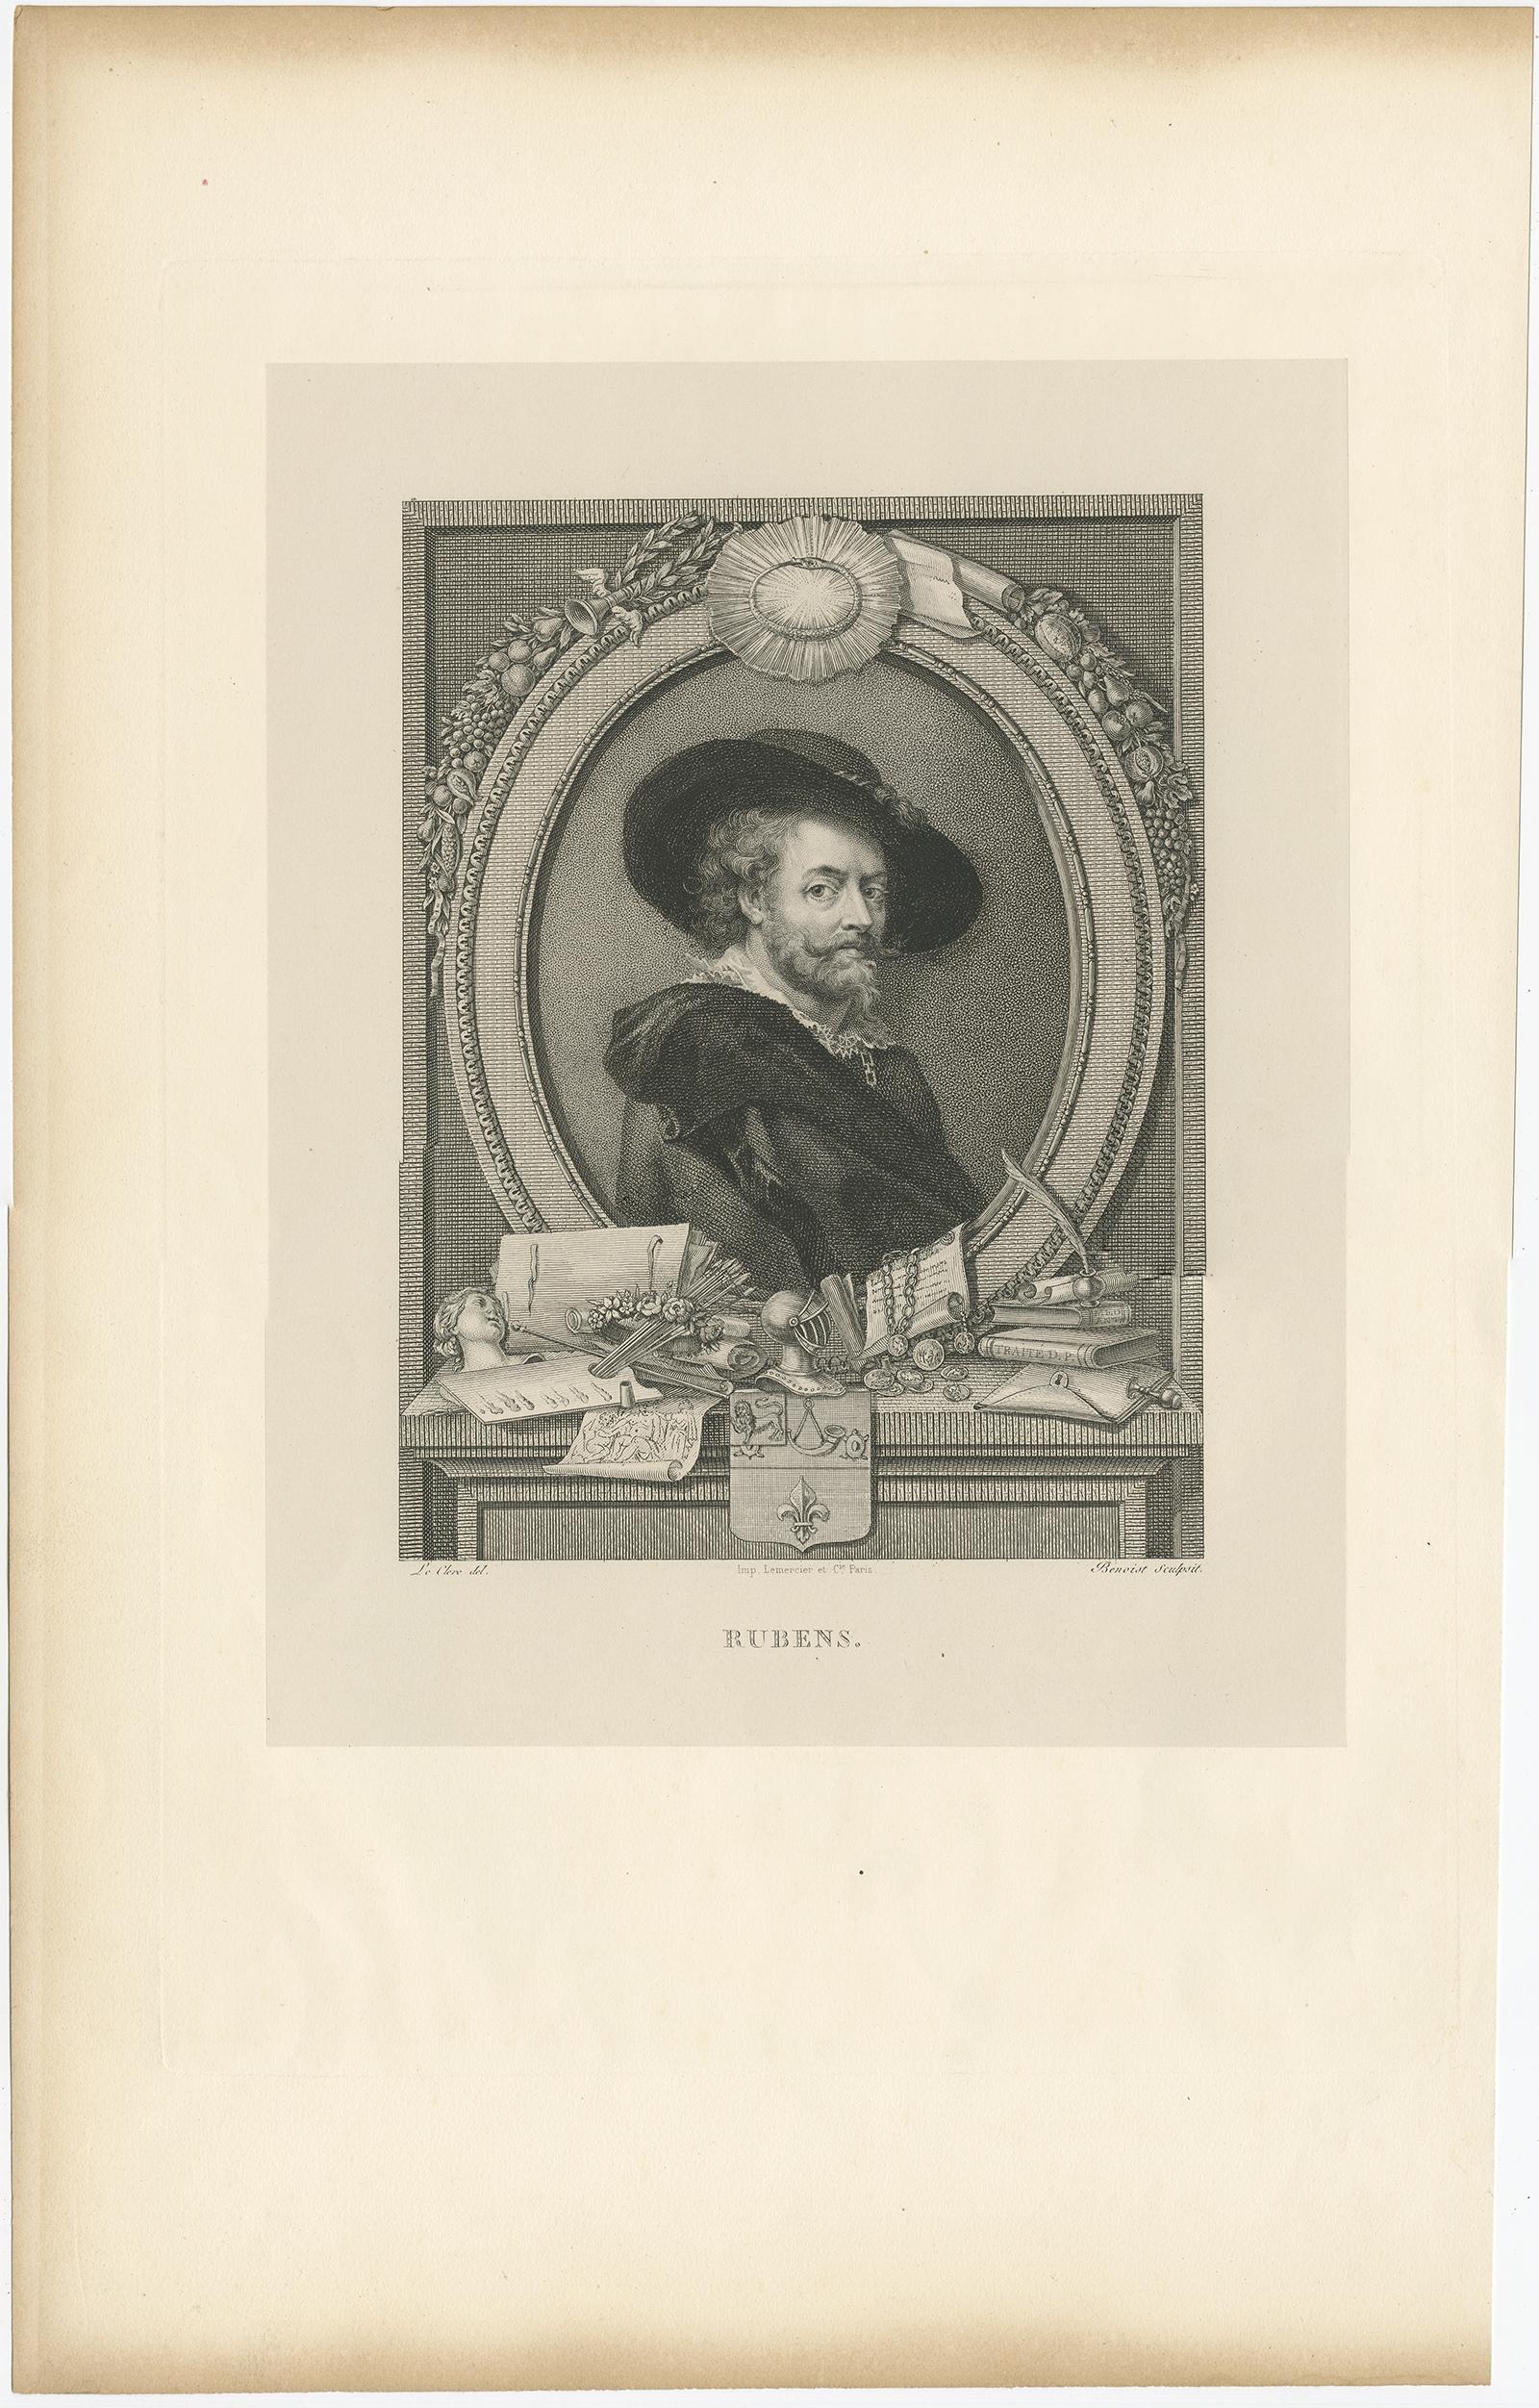 Antique portrait titled 'Rubens'. 

Portrait of the Baroque painter Peter Paul Rubens. Source unknown, to be determined.

Artists and Engravers: Made by Benoist after Le Clere.

Condition:
Very good, general age-related toning. Please study